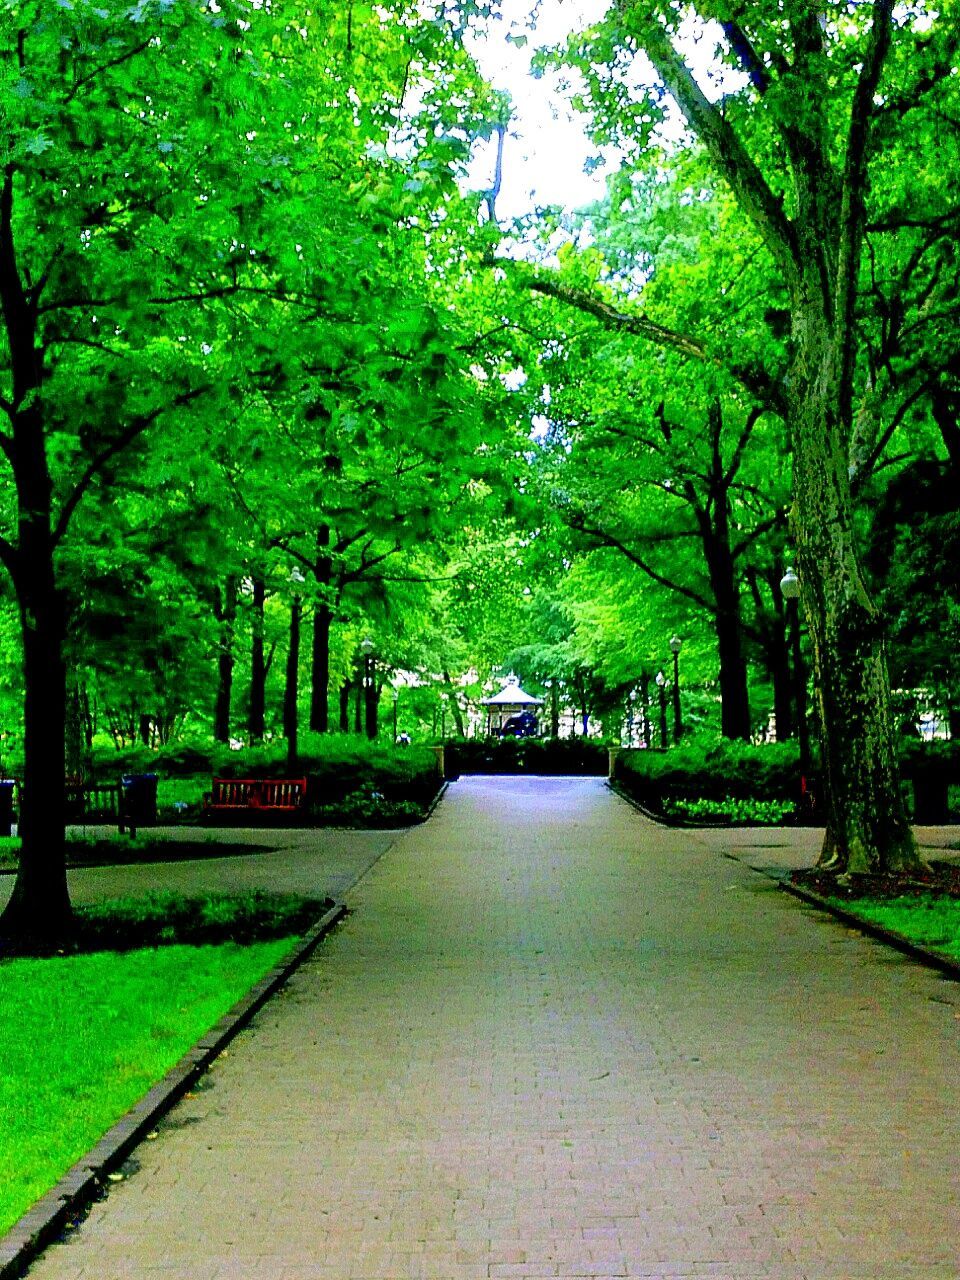 Narrow pathway along trees in the park